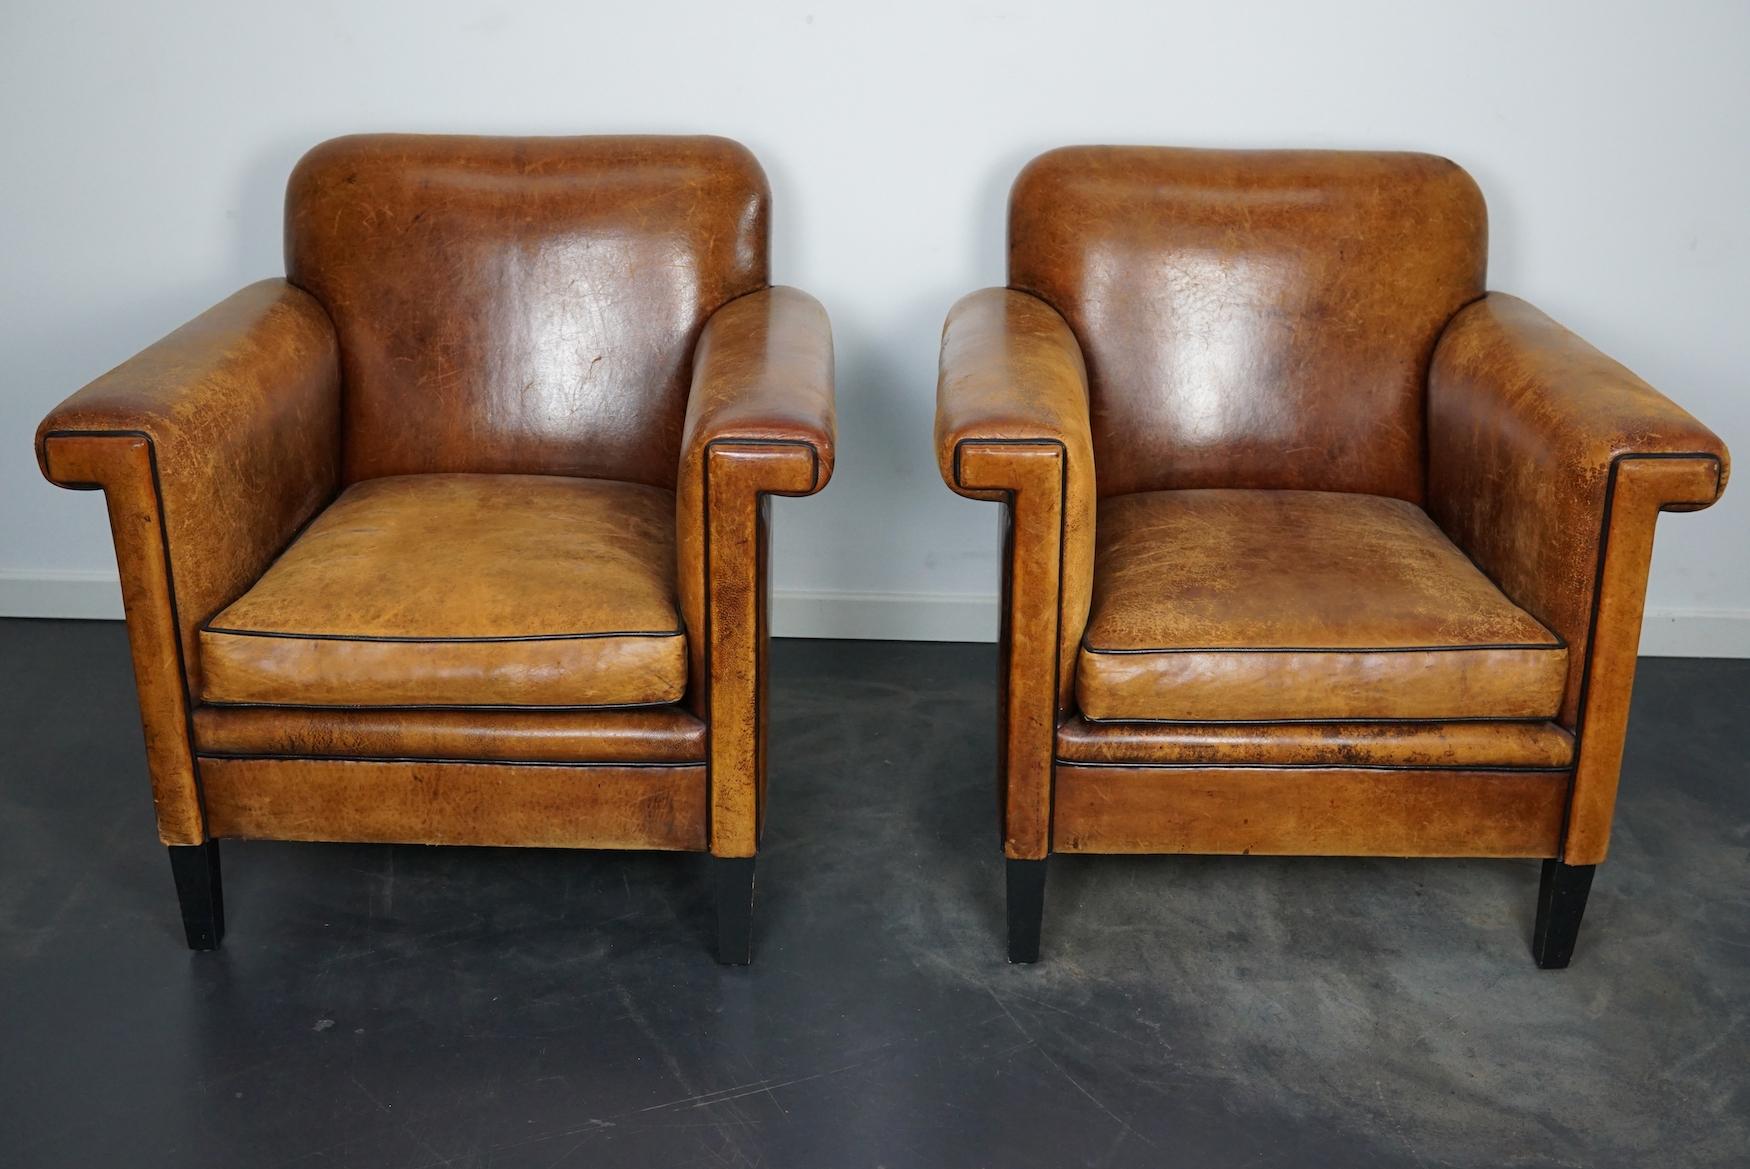 This pair of cognac-colored leather club chairs come from the Netherlands. They are upholstered with hand patinated leather and feature black piping and wooden legs.